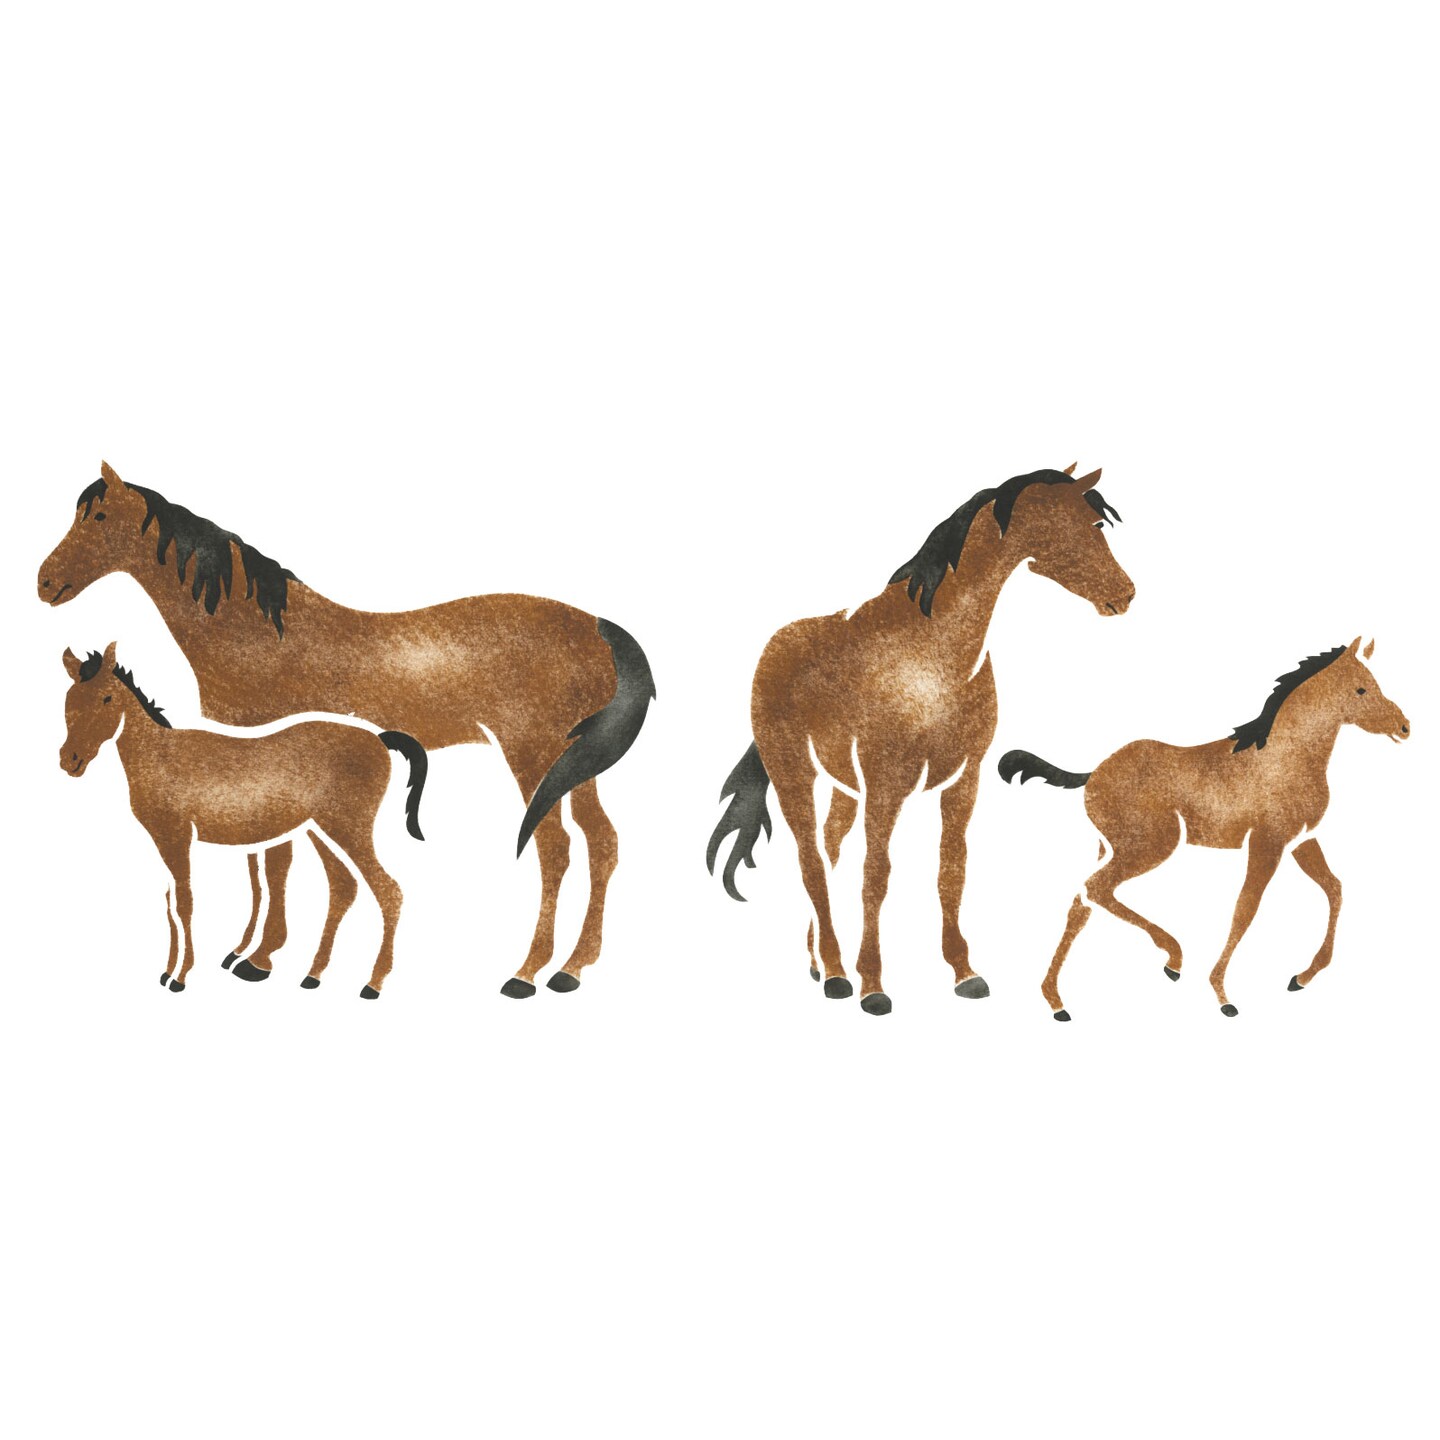 Four Horses Wall Stencil | 1119 by Designer Stencils | Animal &#x26; Nature Stencils | Reusable Art Craft Stencils for Painting on Walls, Canvas, Wood | Reusable Plastic Paint Stencil for Home Makeover | Easy to Use &#x26; Clean Art Stencil